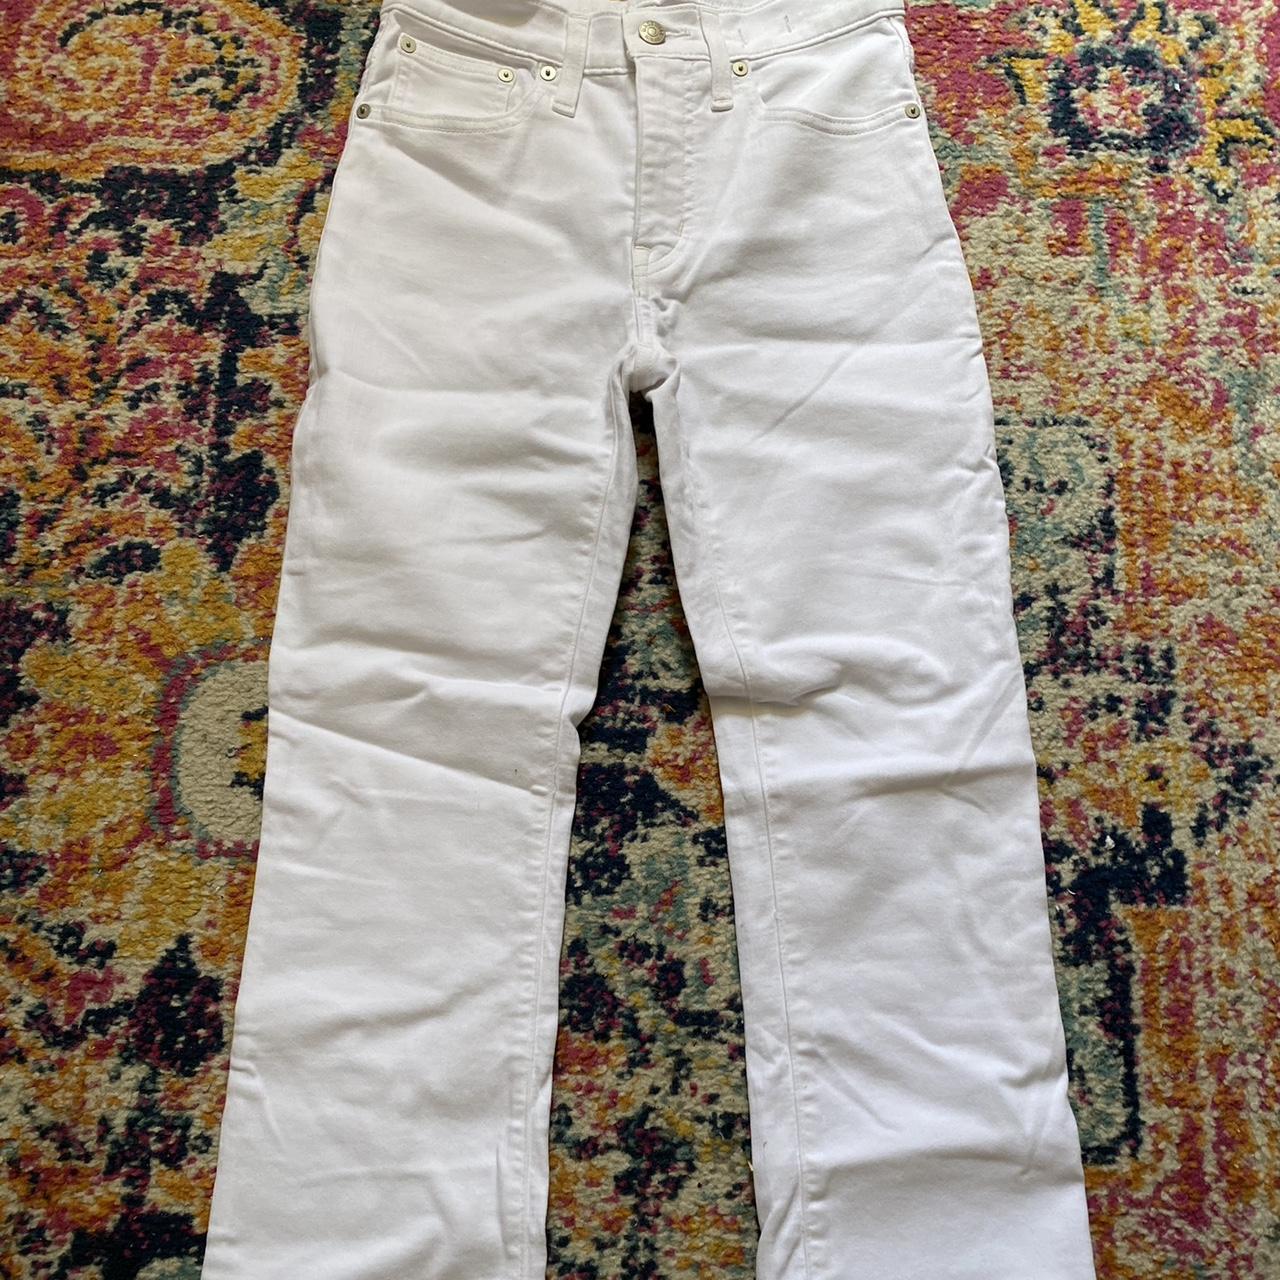 Madewell demi boot pants- They've been worn, though - Depop